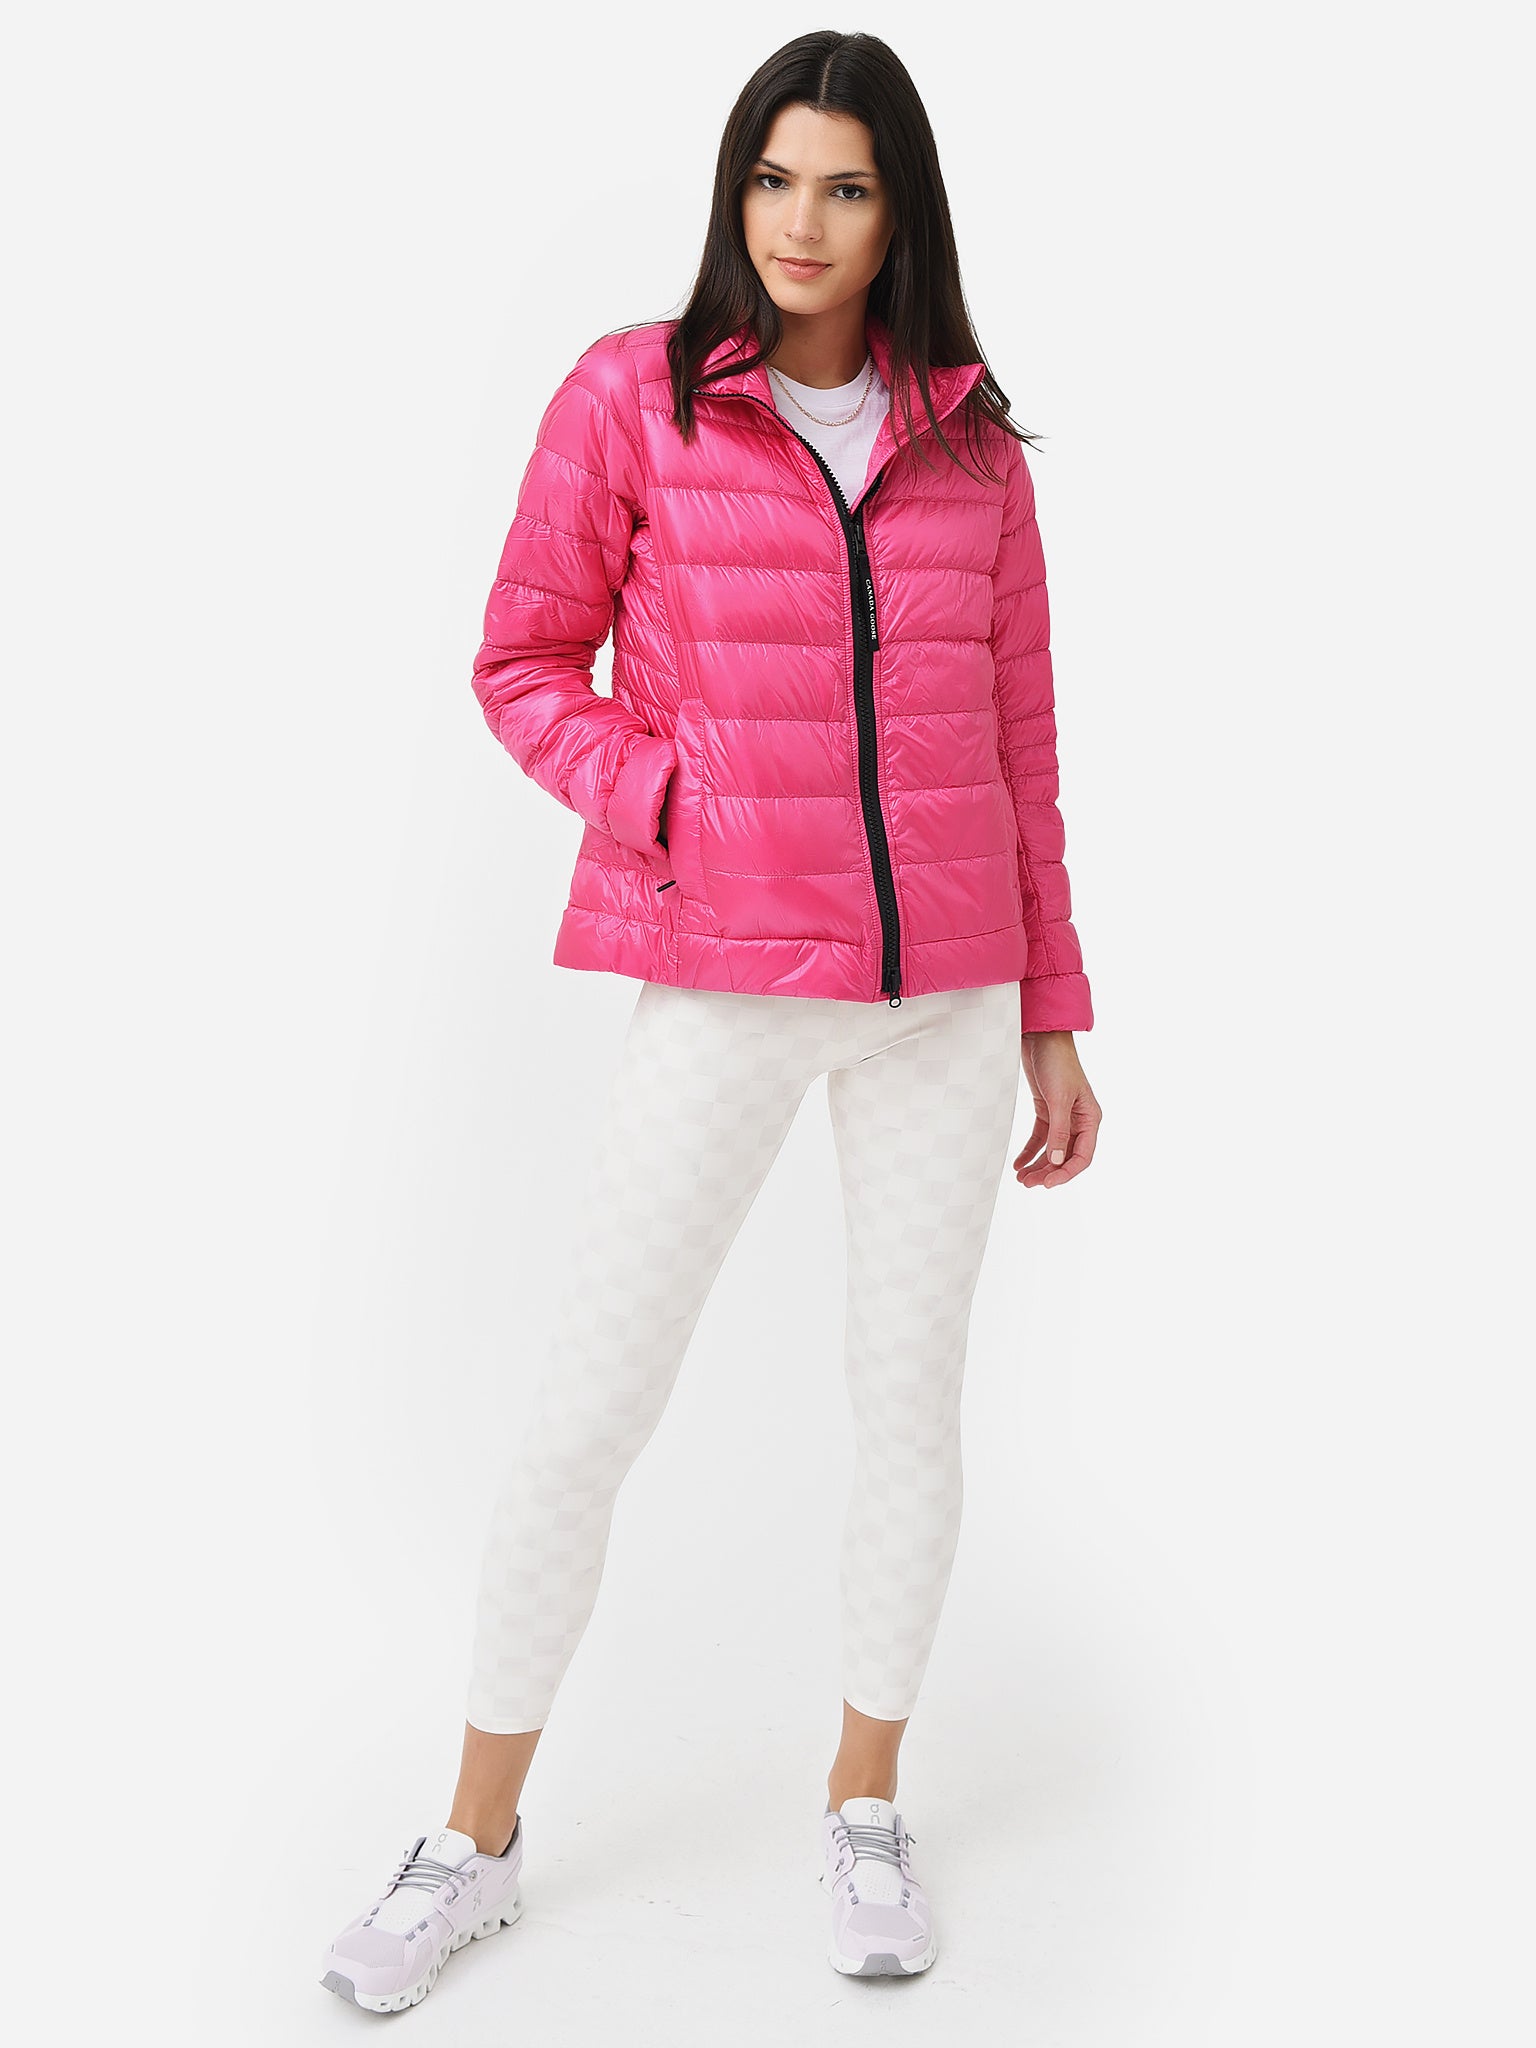 Canada Goose Cypress Jacket in Pink